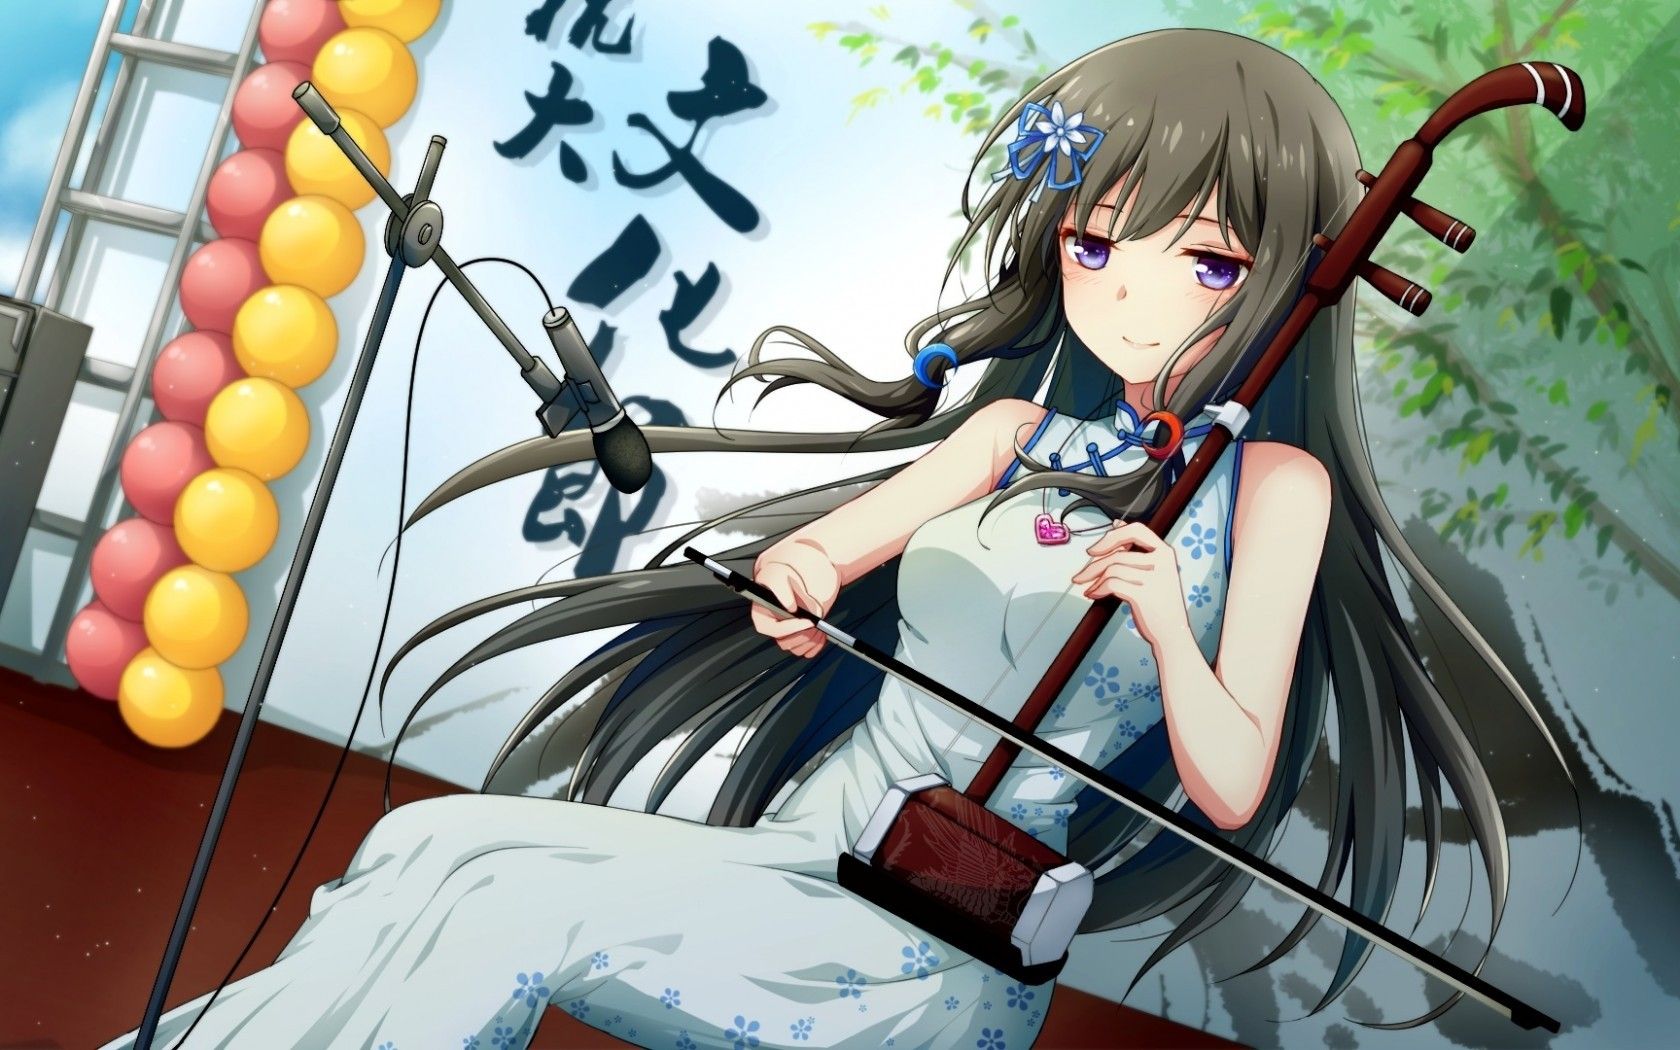 Download 1680x1050 Anime Girl, Chinese Dress, Instrument, Black